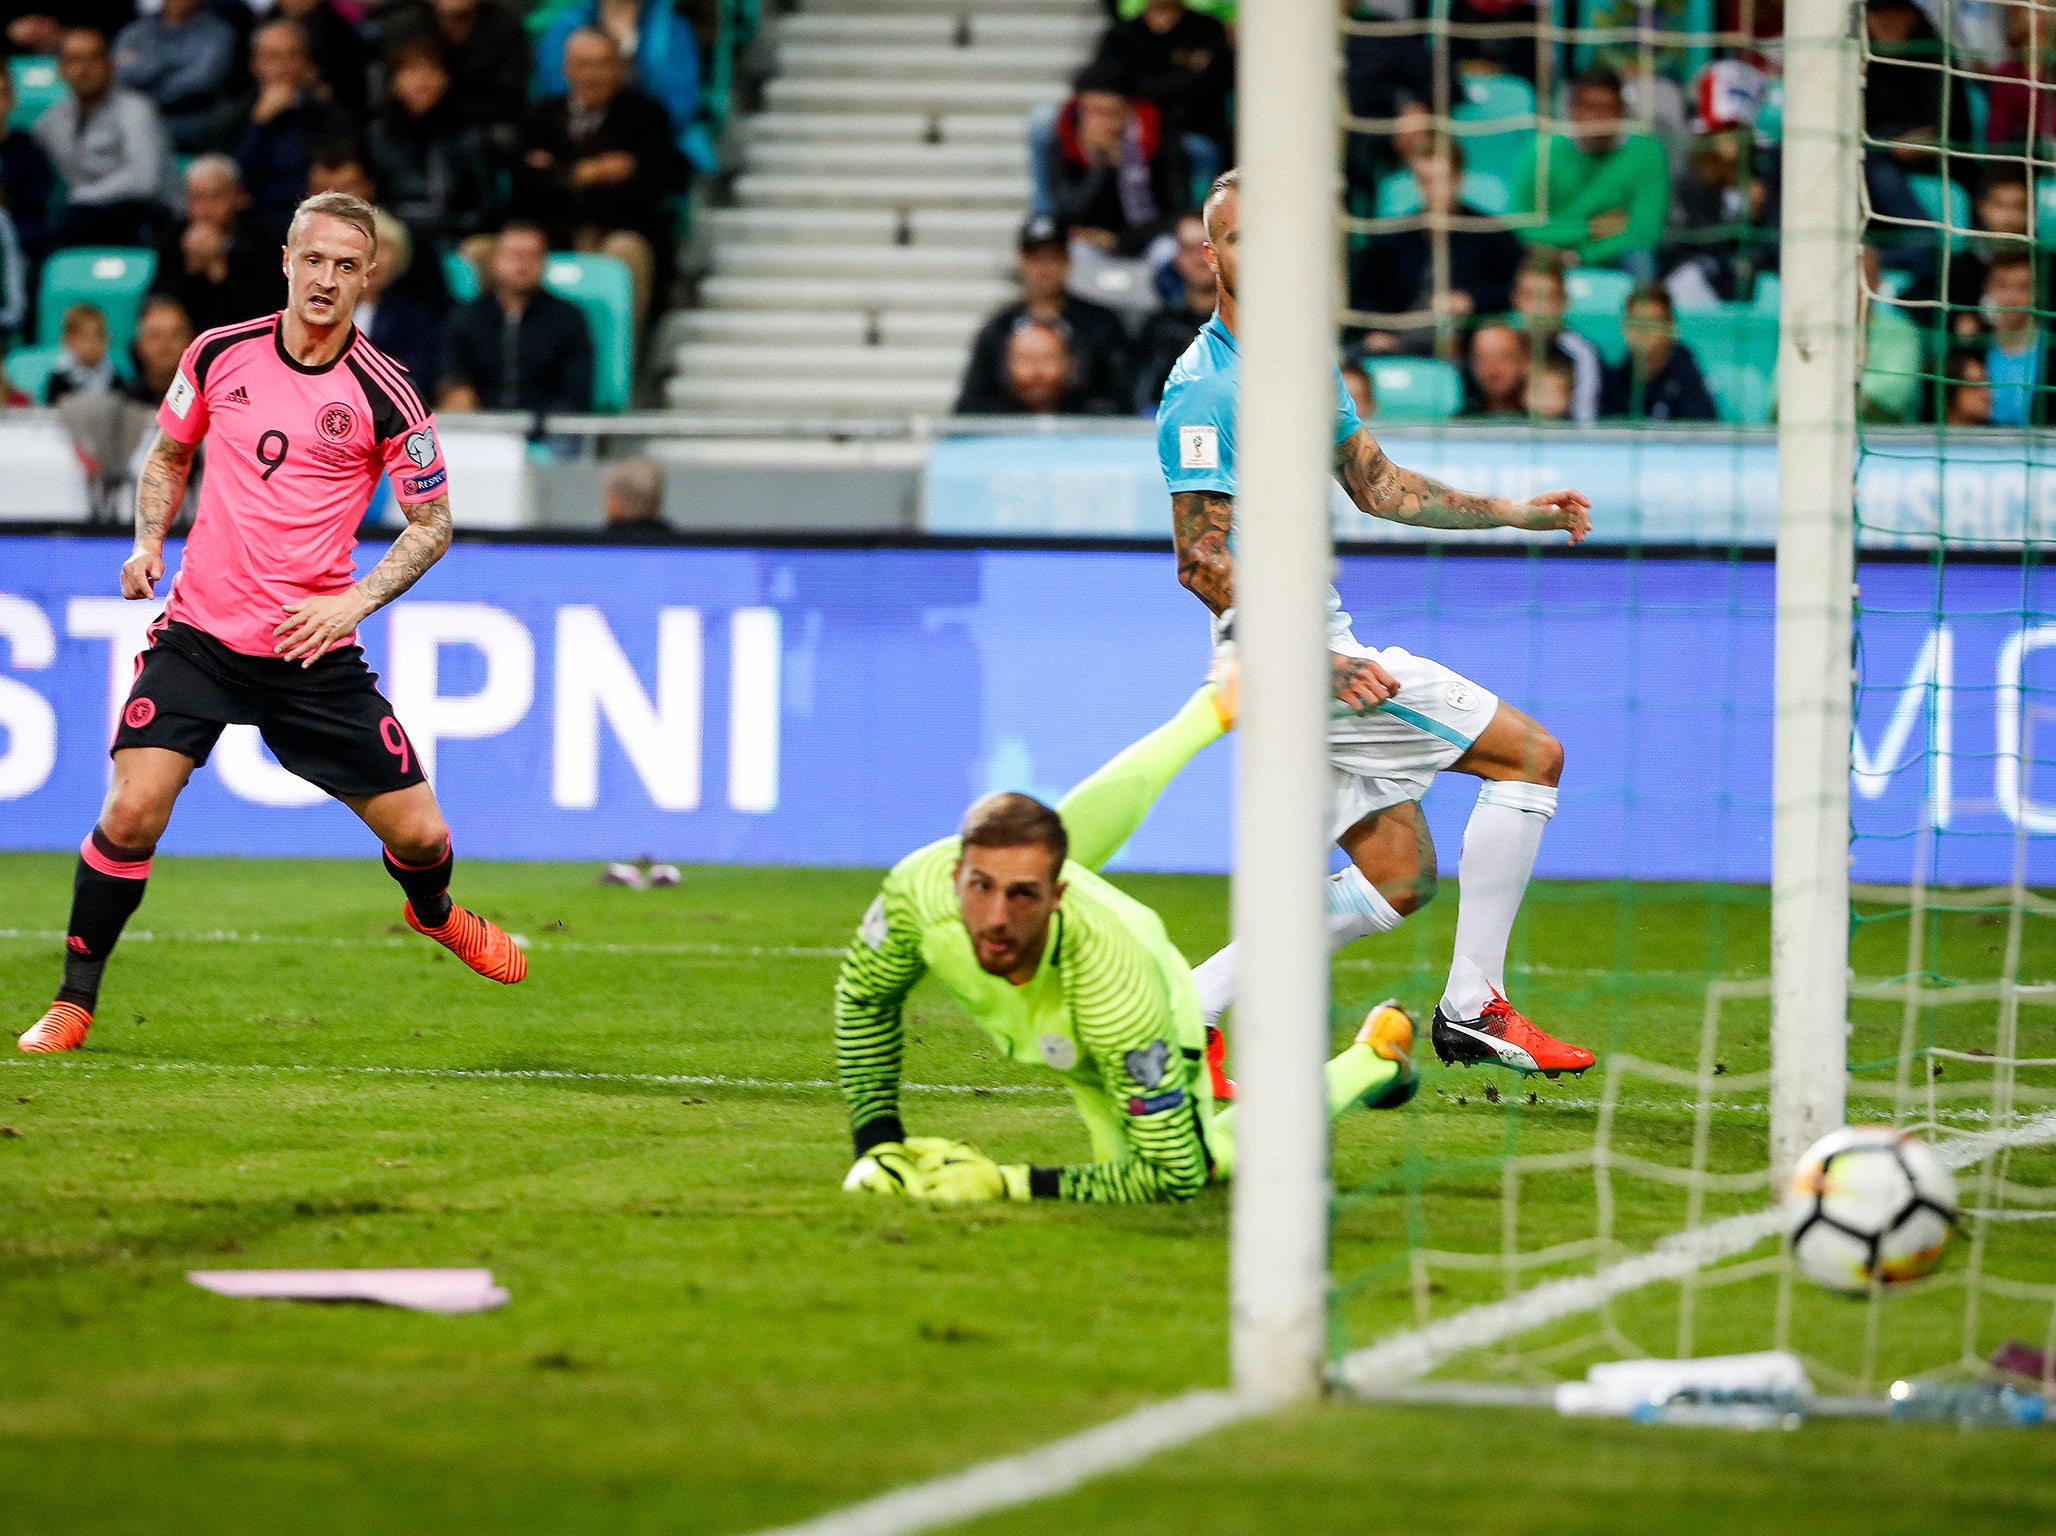 Griffiths opened the scoring for Scotland